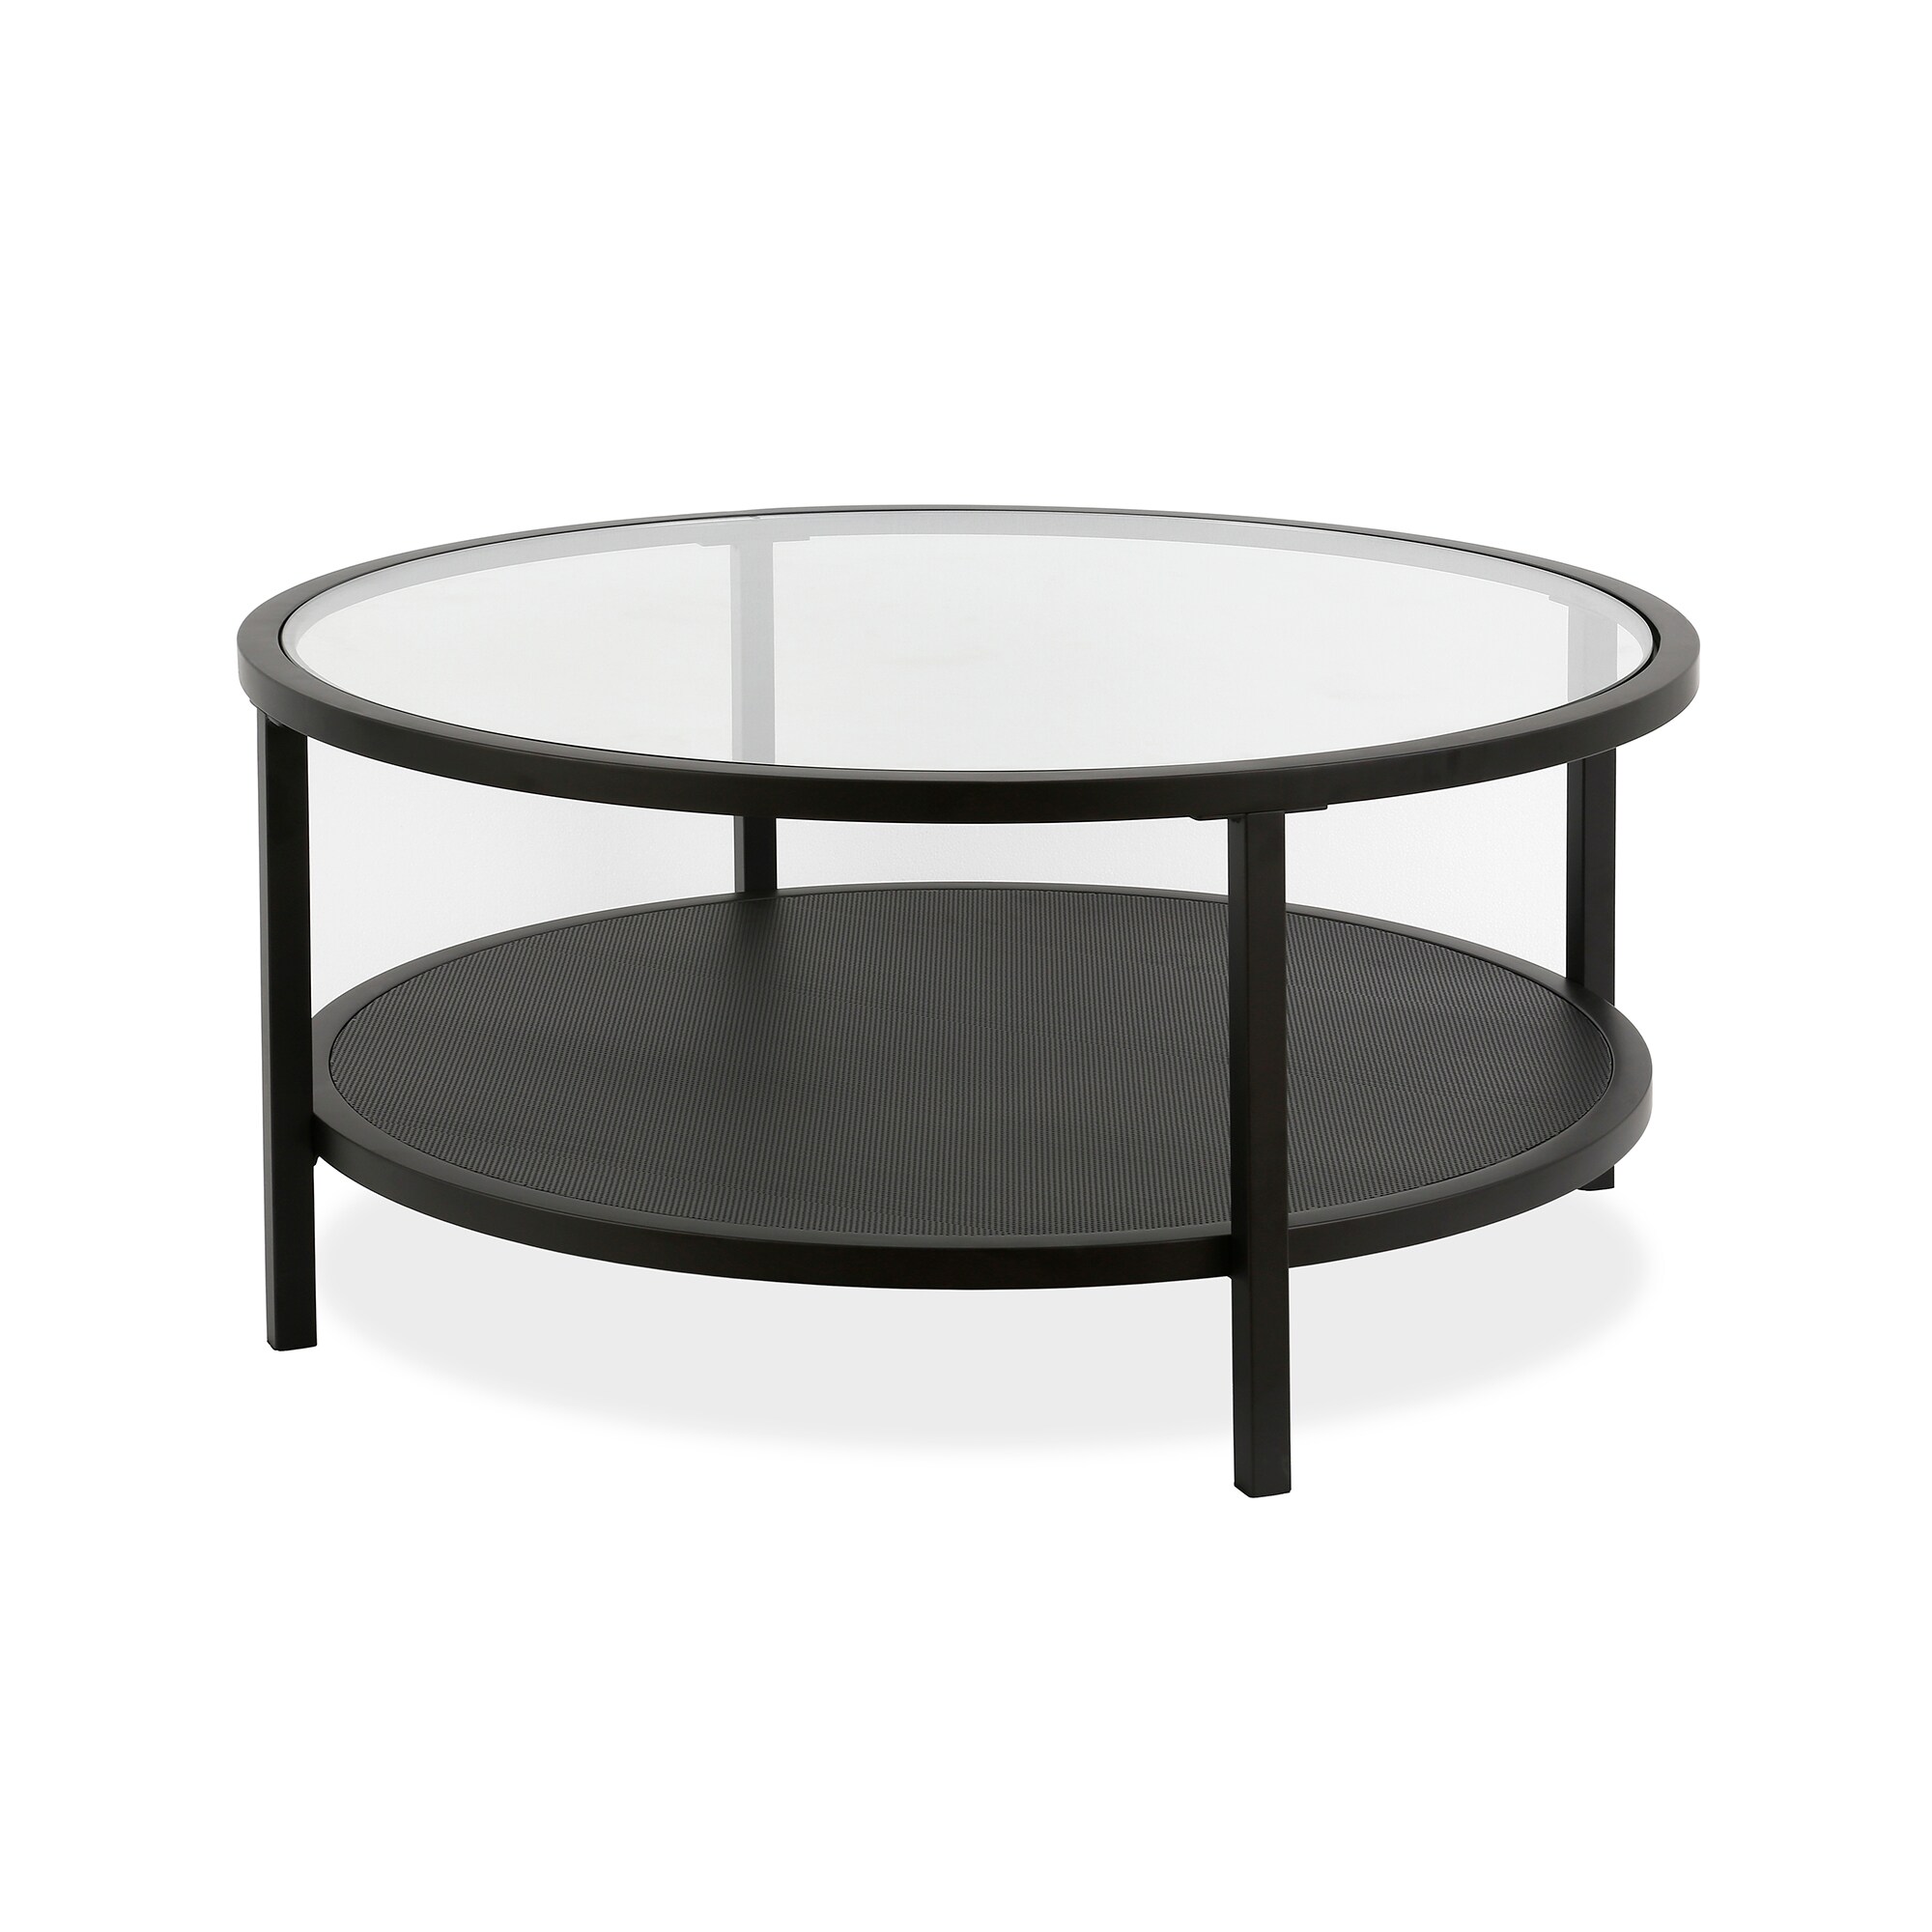 Hailey Home Rigan Blackened Bronze Glass Modern Coffee Table in the ...